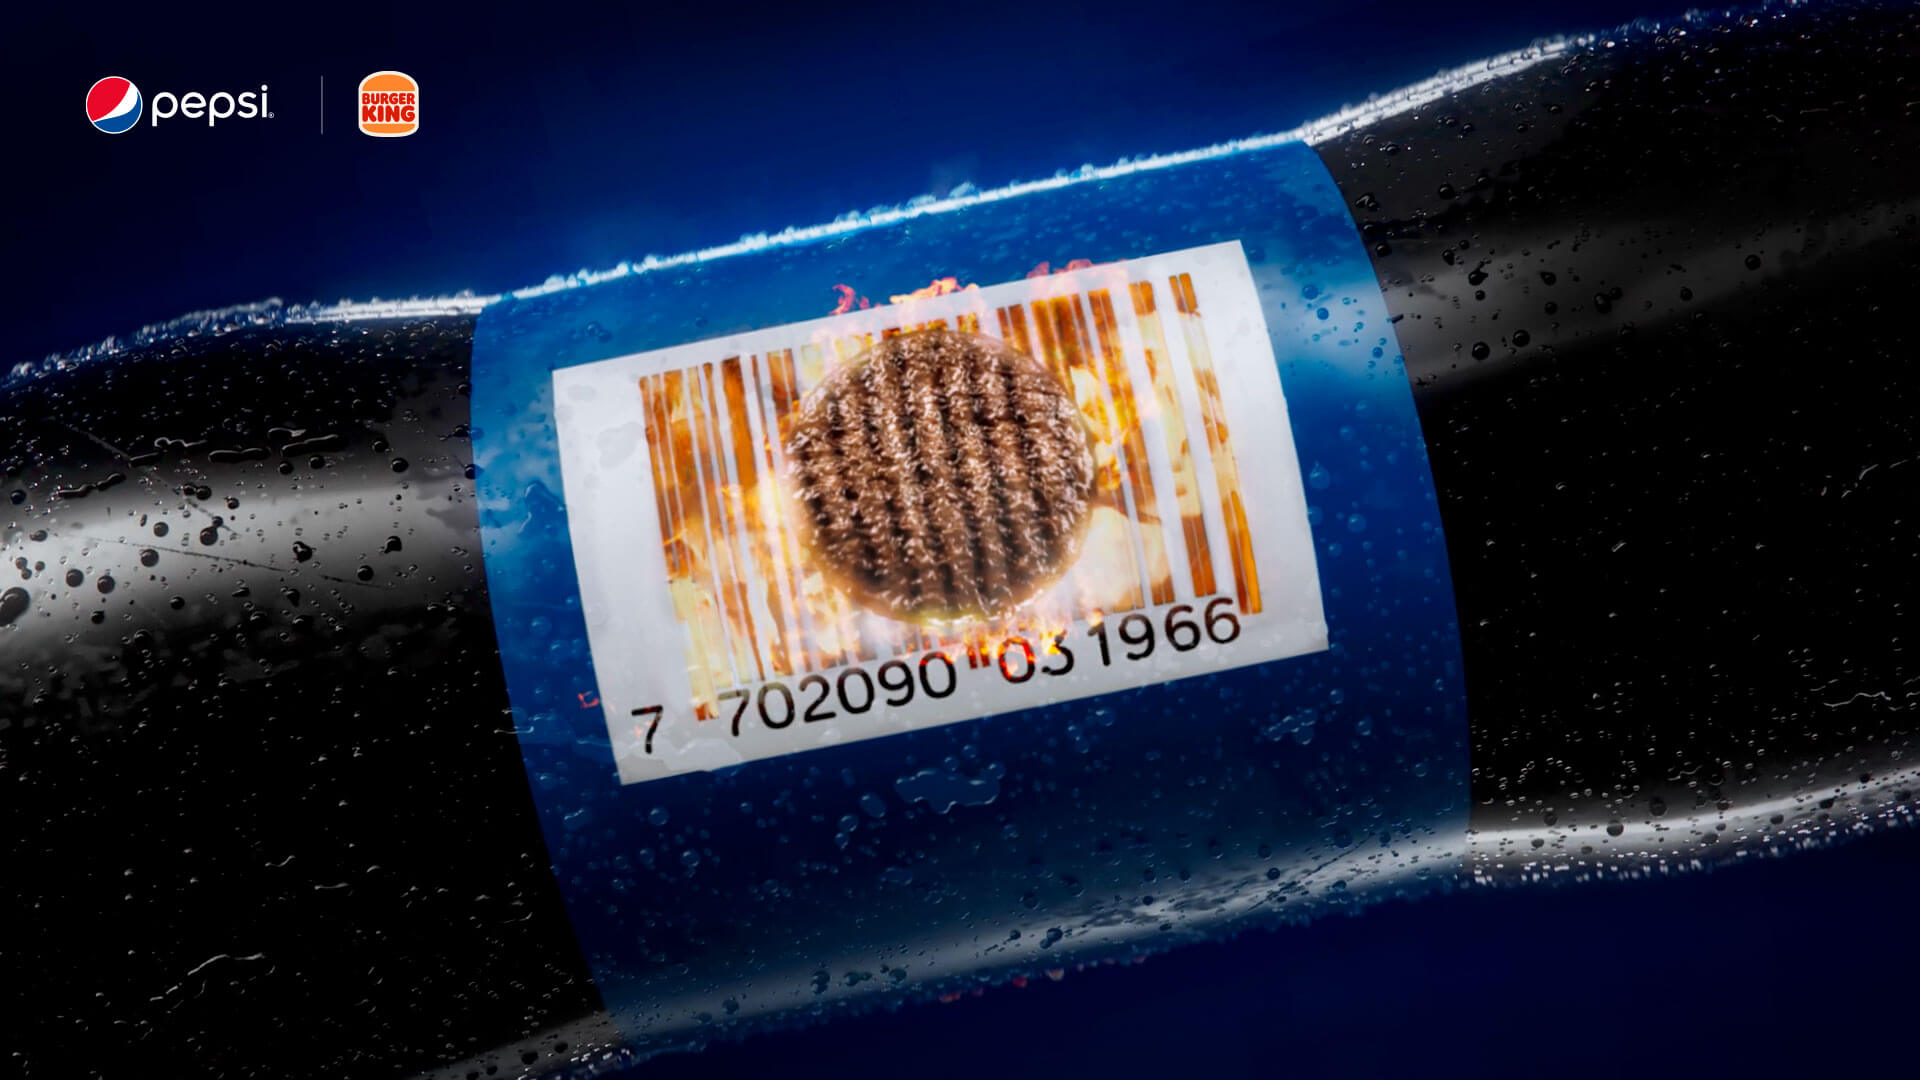 Grilled Barcode, Burger King, Pepsi, Campaigns of the world